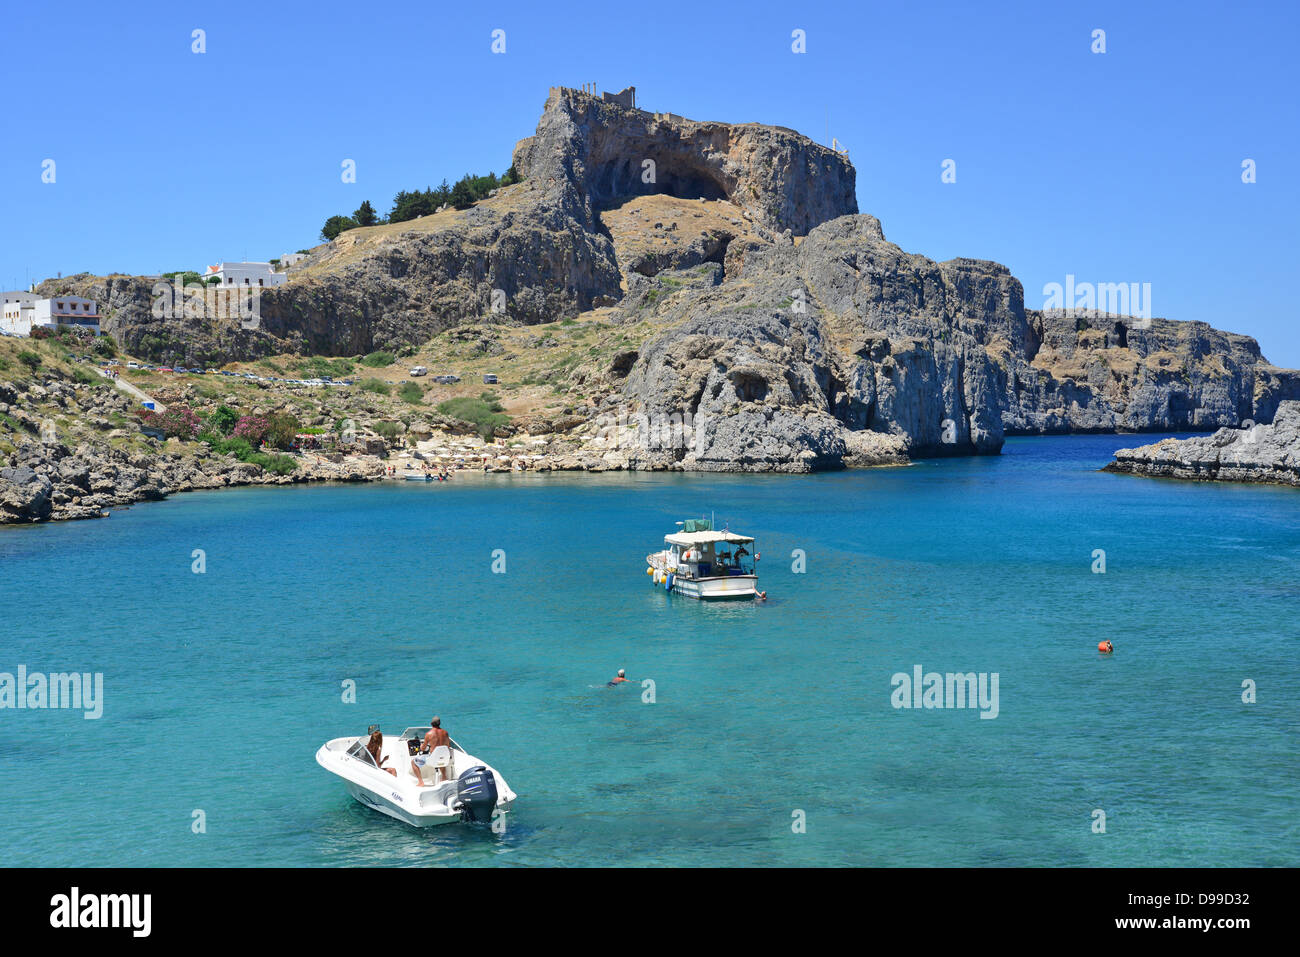 St Paul's Bay, Lindos, Rhodes (Rodos), The Dodecanese, South Aegean Region, Greece Stock Photo